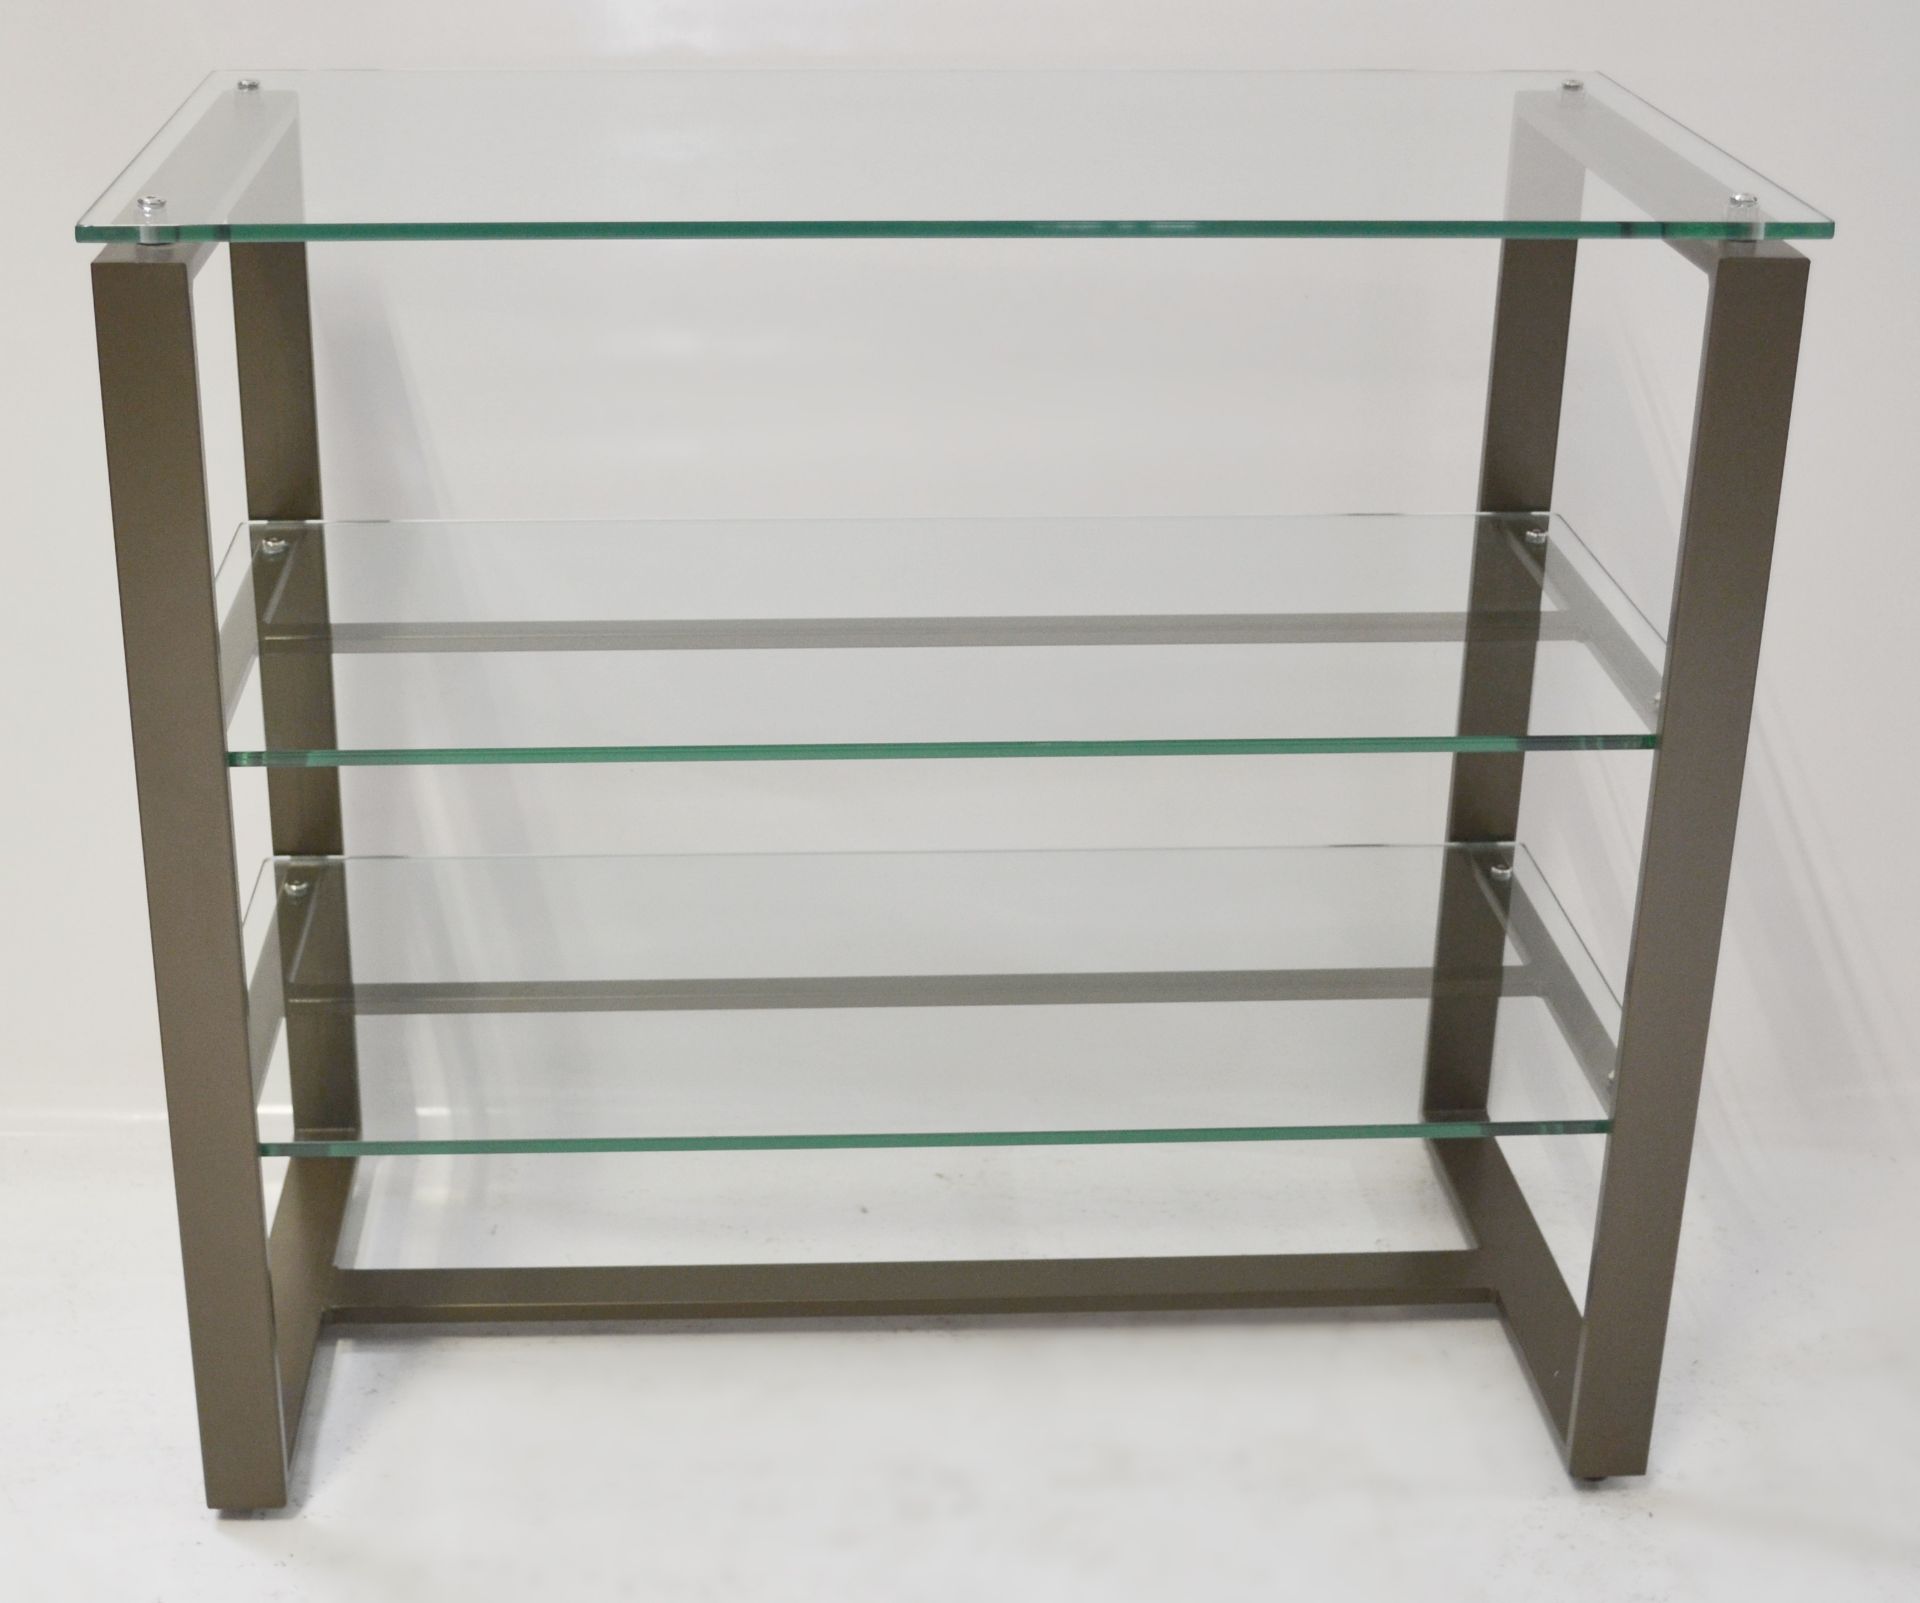 1 x 3-Shelf Glass Retail Display Unit With A Sturdy Metal Frame - Ex-Display, Recently Removed